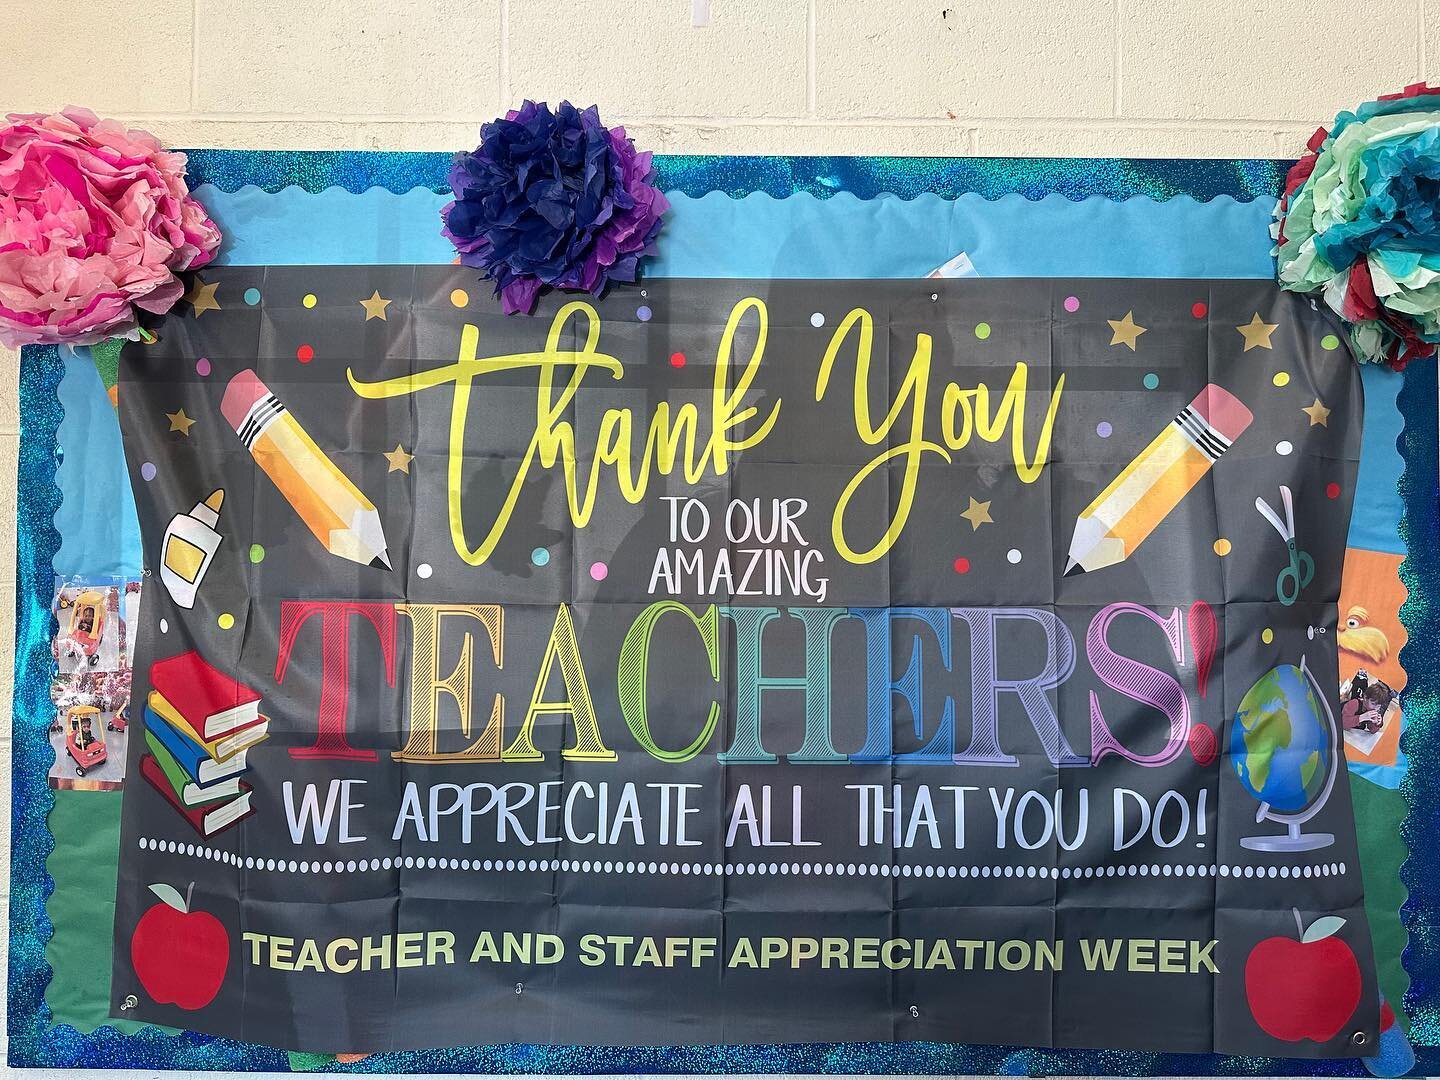 During this teacher appreciation week, we wanted to show our amazing educators how much we value their hard work and dedication. We surprised them with gifts and massages to thank them for all they do. We are so lucky to have such incredible teachers